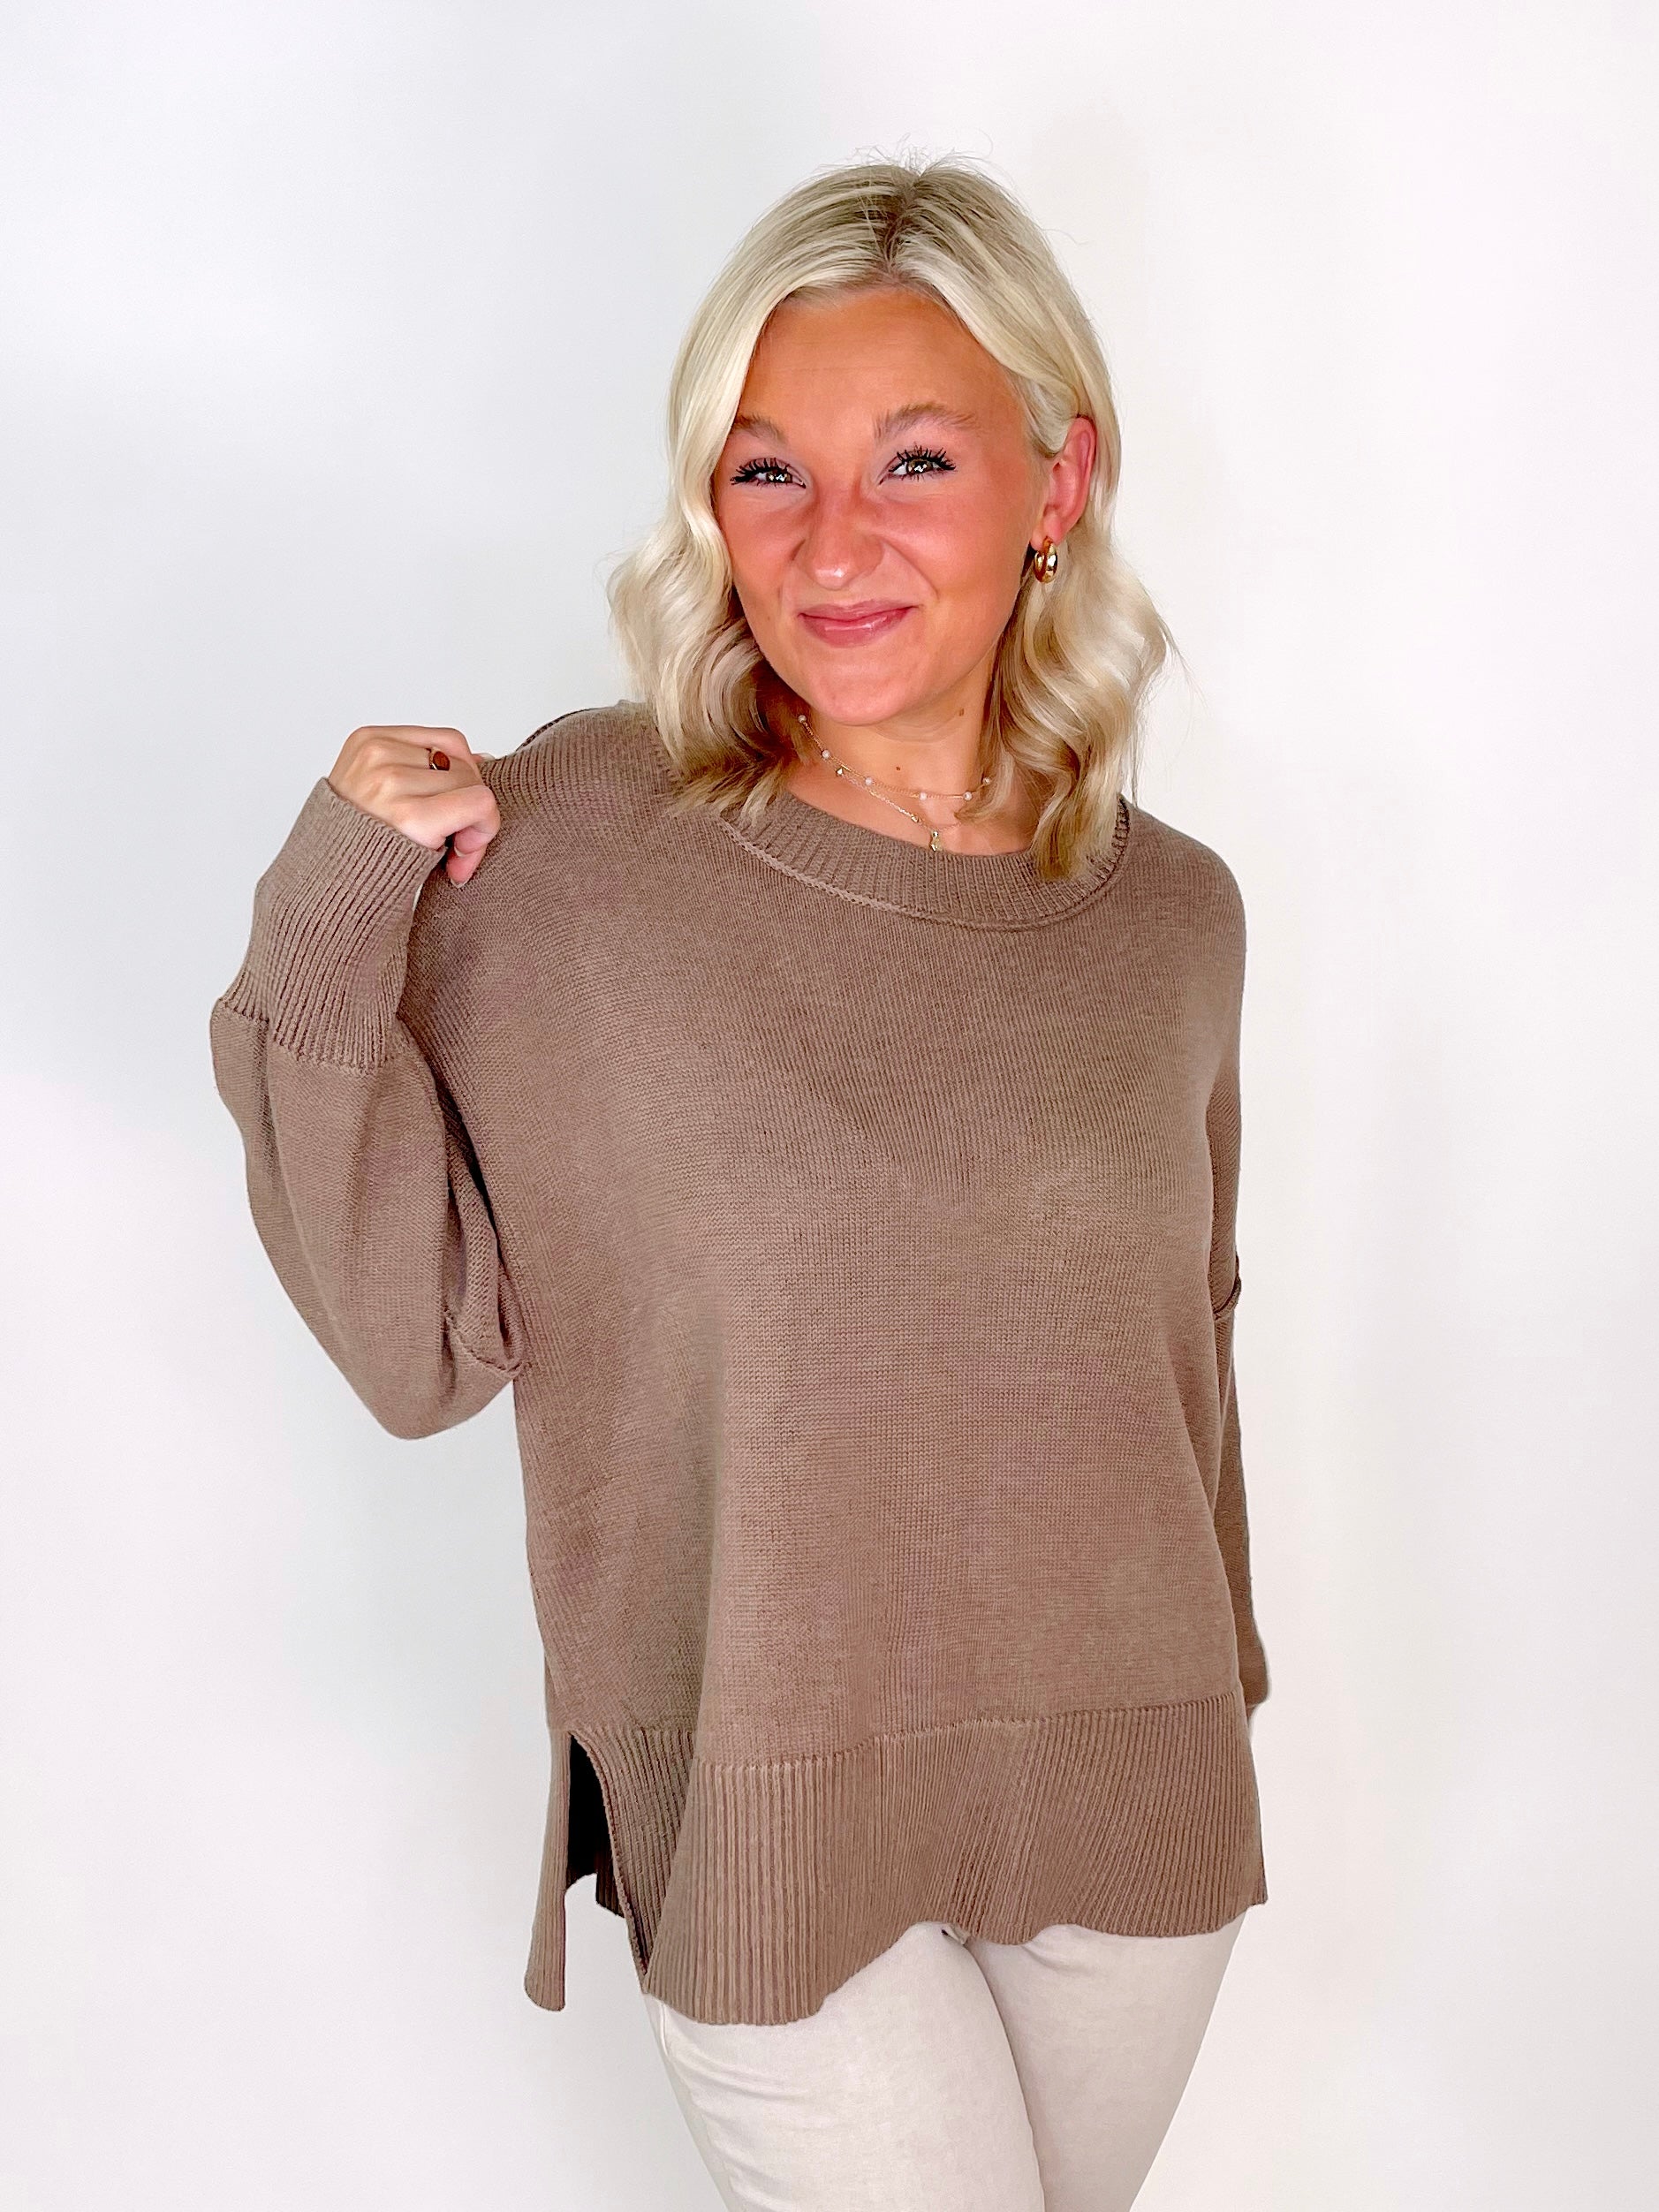 The Channing Sweater-Sweaters-Lavender J-The Village Shoppe, Women’s Fashion Boutique, Shop Online and In Store - Located in Muscle Shoals, AL.